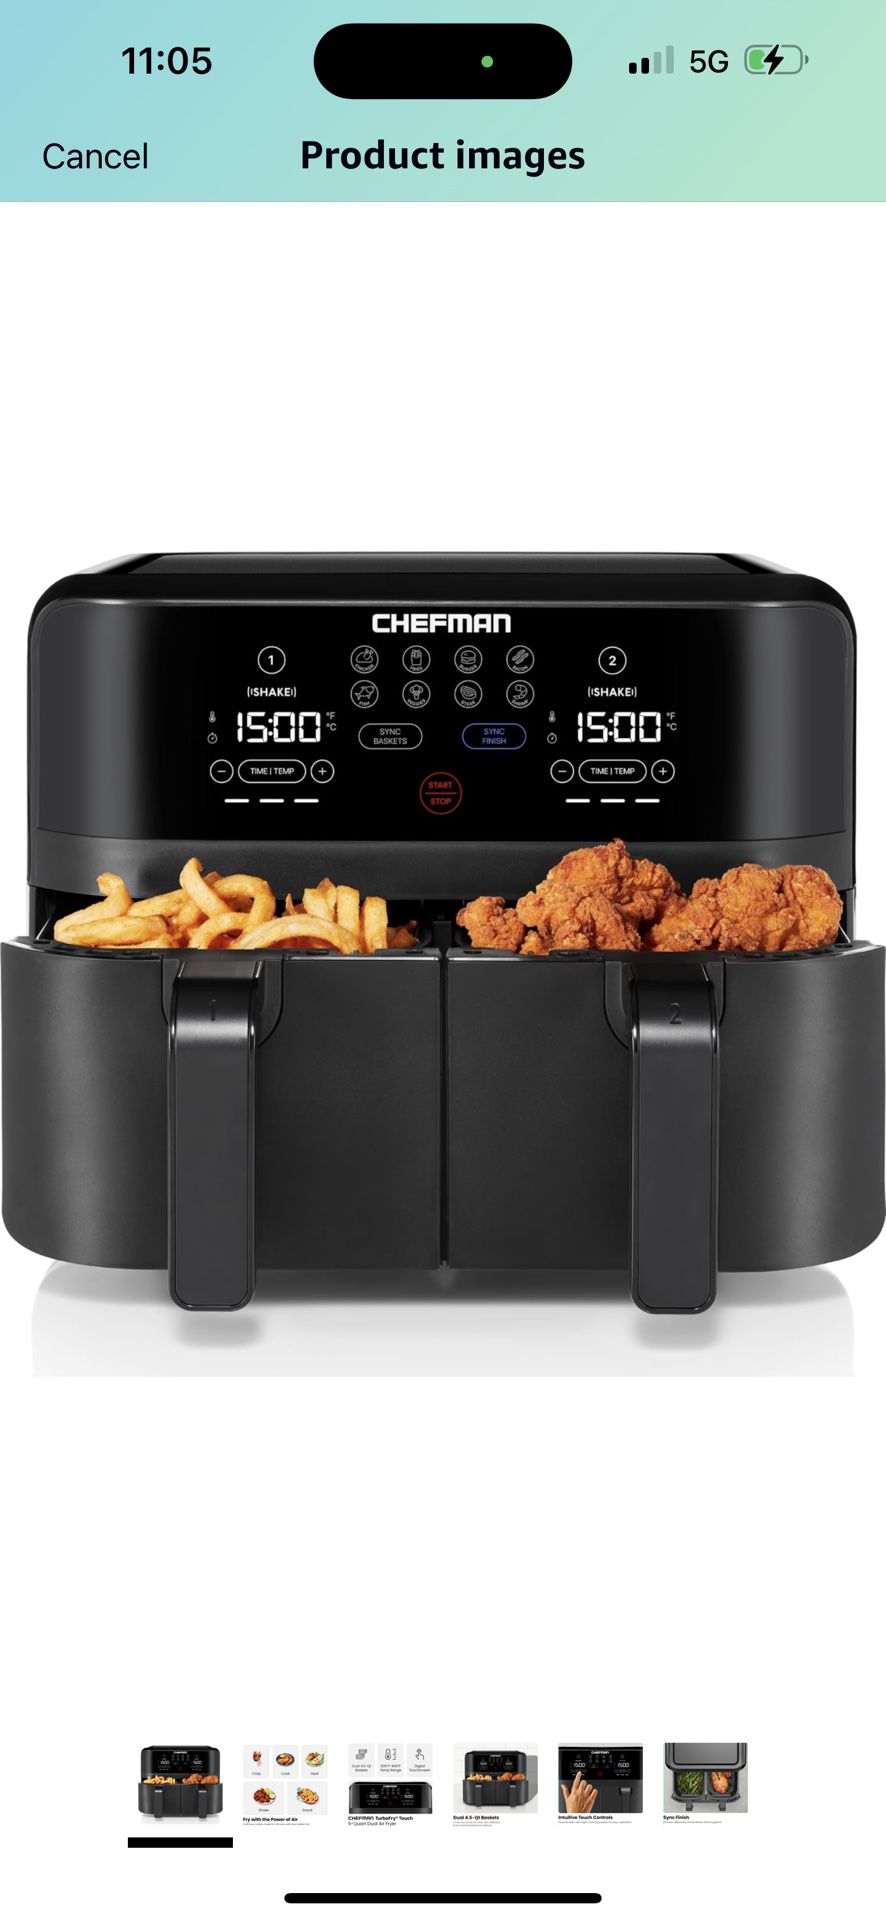 Chefman TurboFry Touch Dual Air Fryer, Maximize The Healthiest Meals With Double Basket Capacity, One-Touch Digital Controls And Shake Reminder For Th